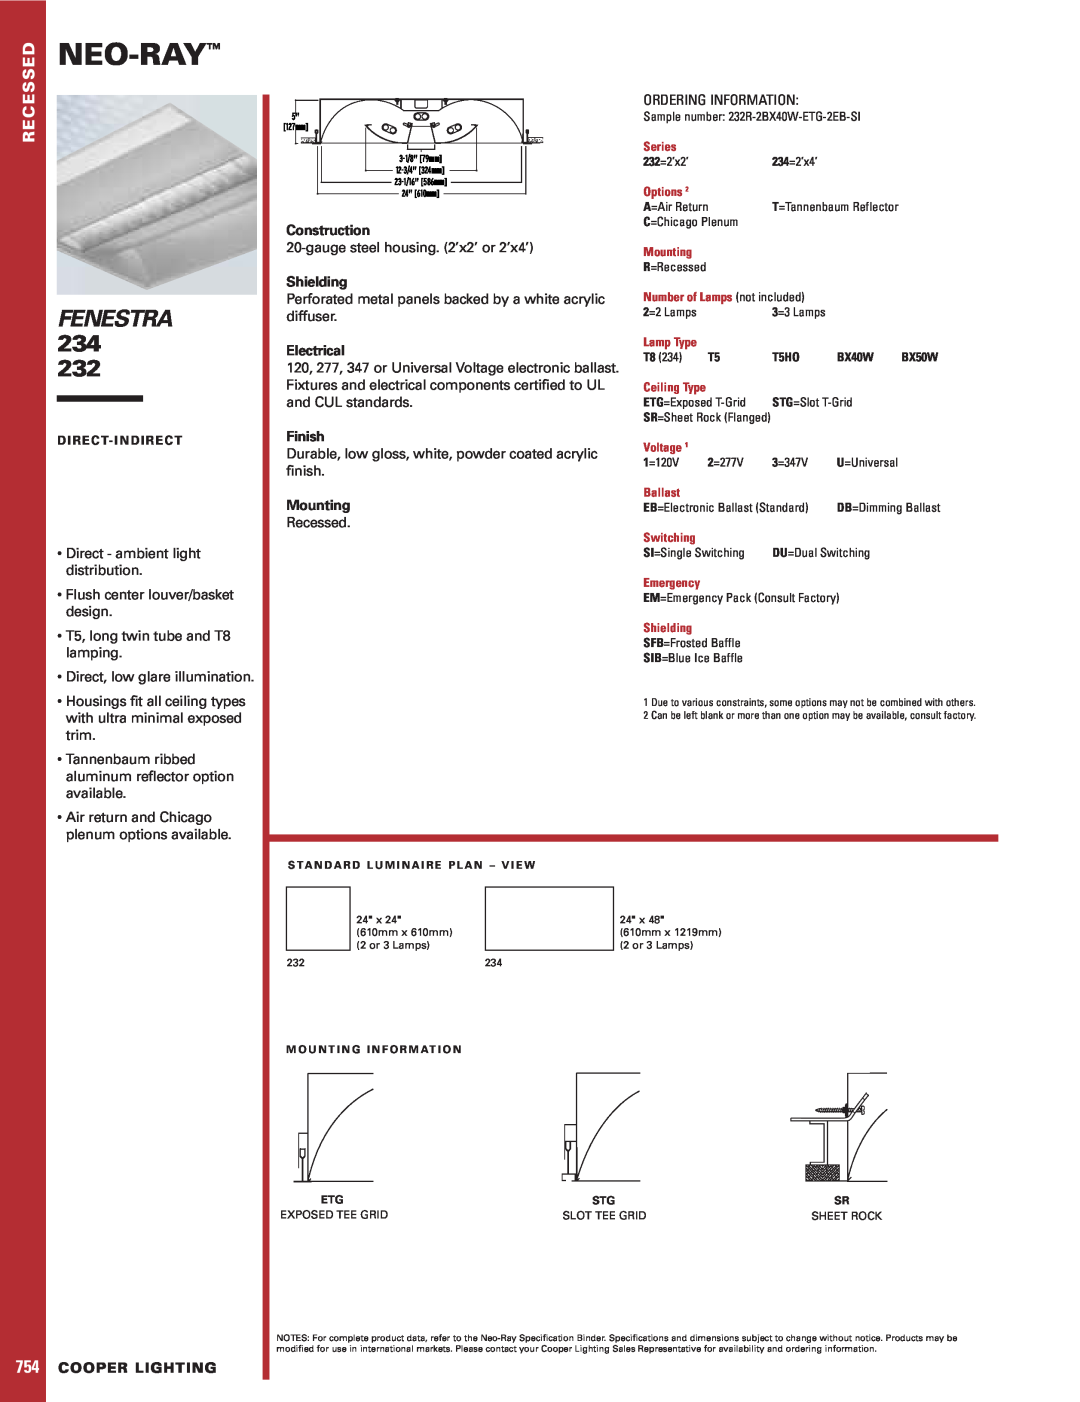 Cooper Lighting 234 specifications Neo-Ray, Fenestra, Construction, Shielding, Electrical, Finish, Mounting 